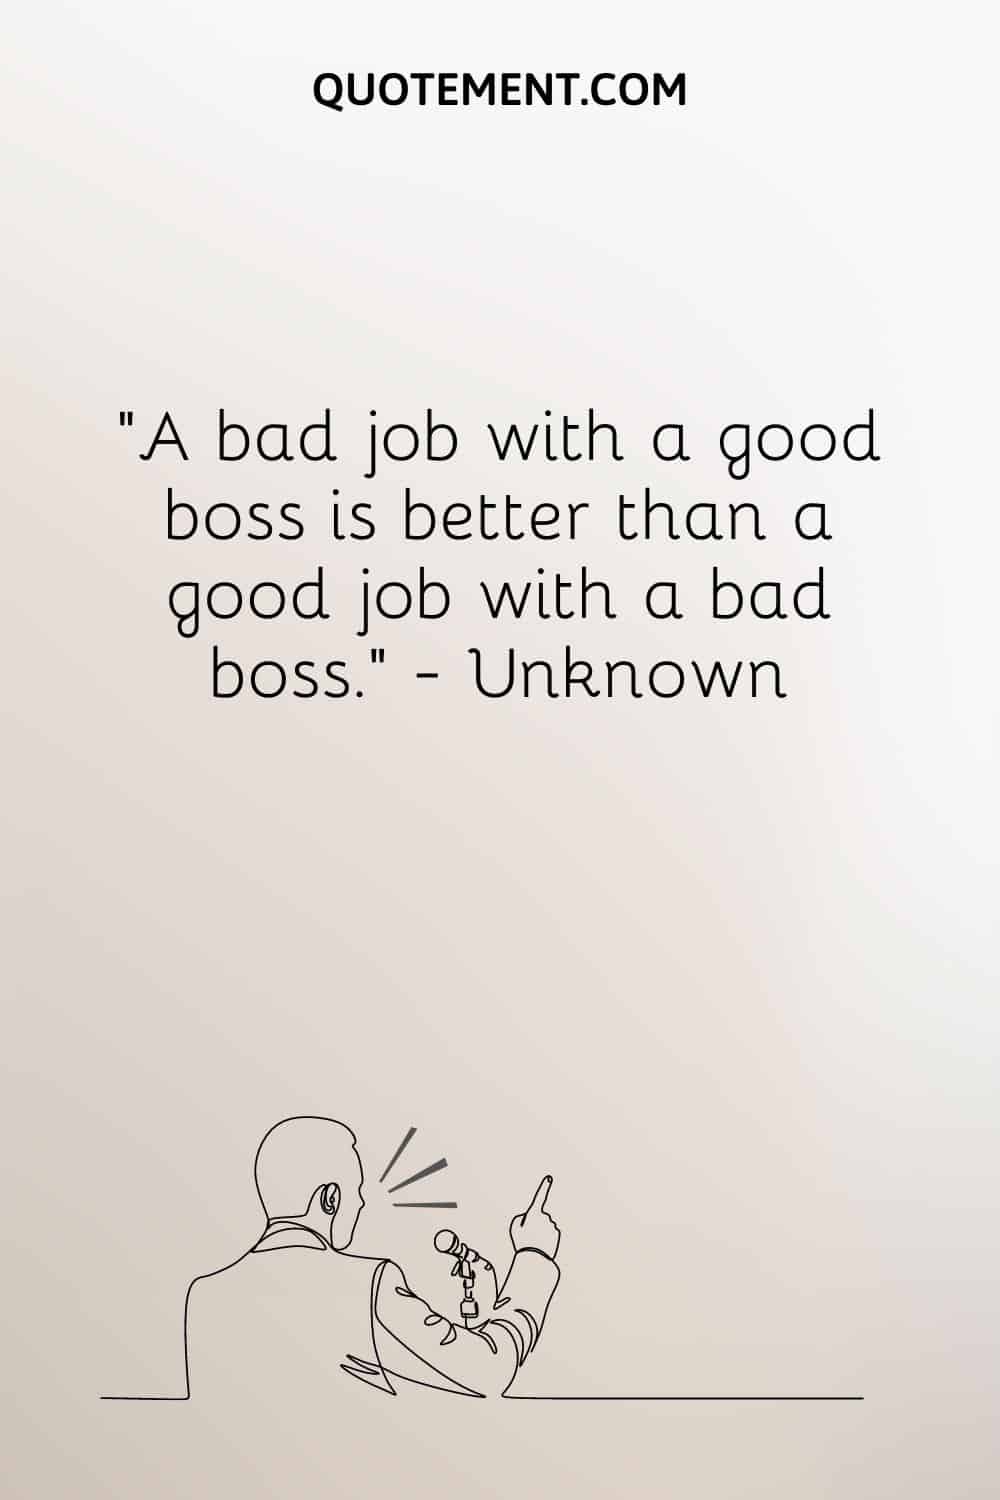 A bad job with a good boss is better than a good job with a bad boss